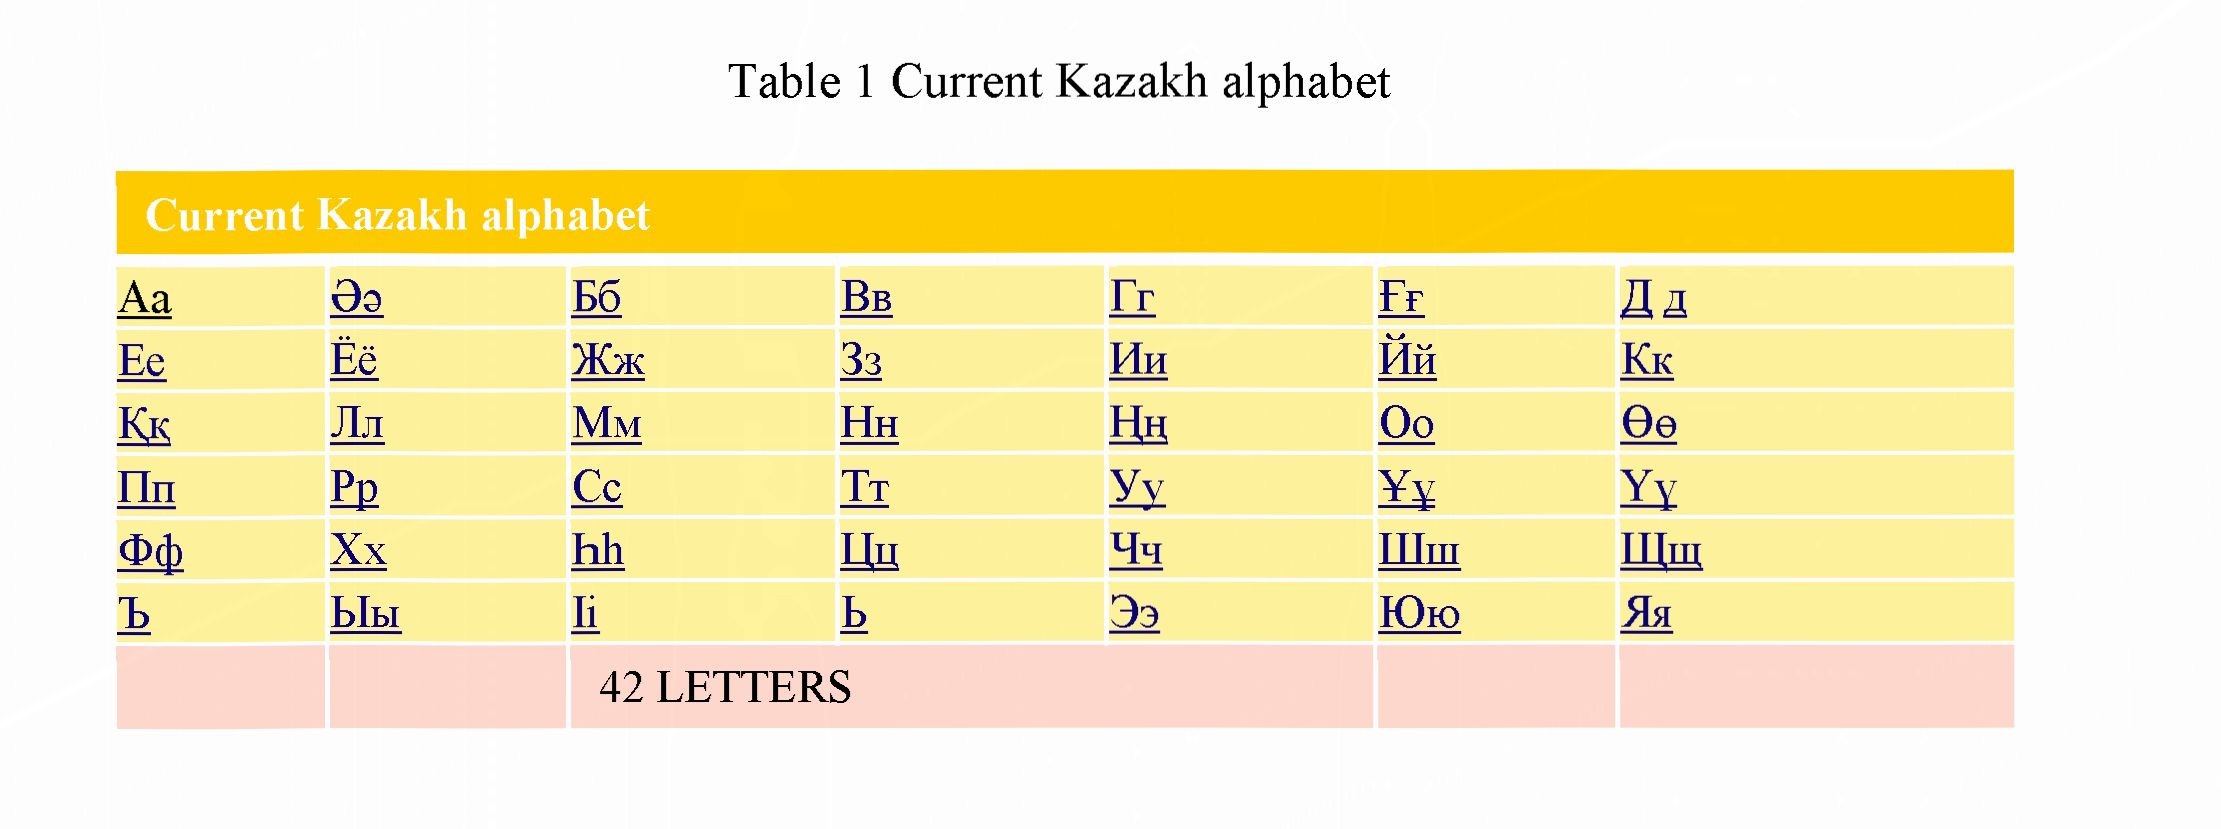 Kazakh language and new alphabets role in national identity building process